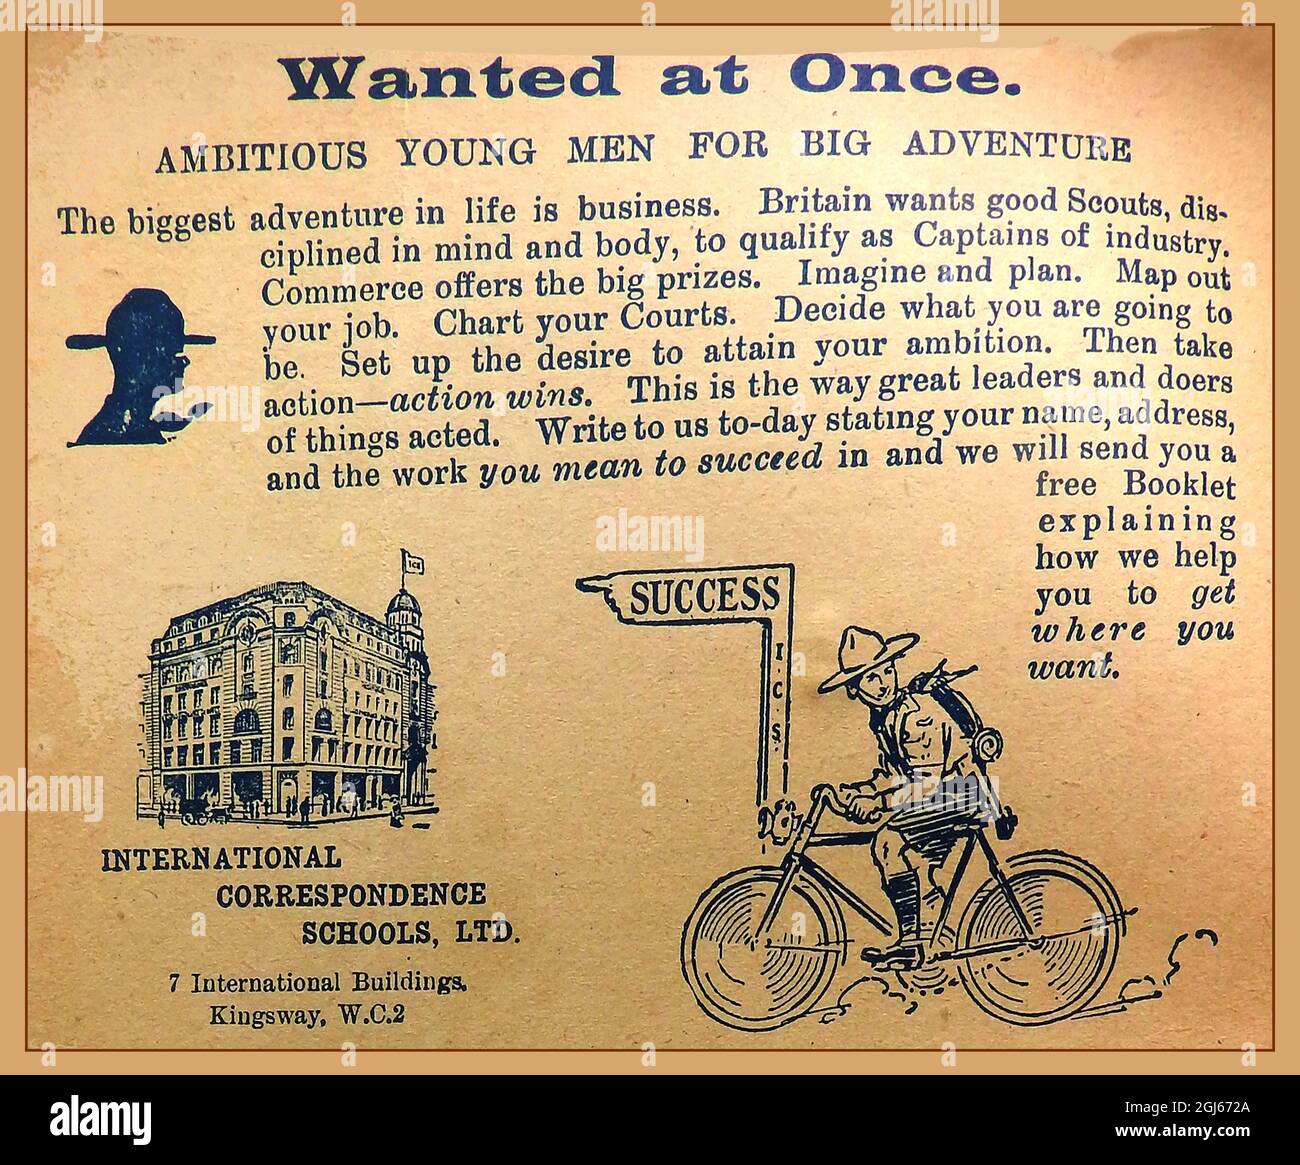 INTERNATIONAL CORRESPONDENCE SCHOOL - A 1920's advertisement aimed at boy scouts,  from a copy of the English publication ' Buffalo Bill's Library'   (Aldine Publishing Co, Ltd. ) that issued a number of novelettes at a cost of  2d (two pence) known as dime novels, Though originating in America,  in Britain  they were known as boys' weeklies or  story papers and  were particularly   popular before  the Second World .War. Stock Photo